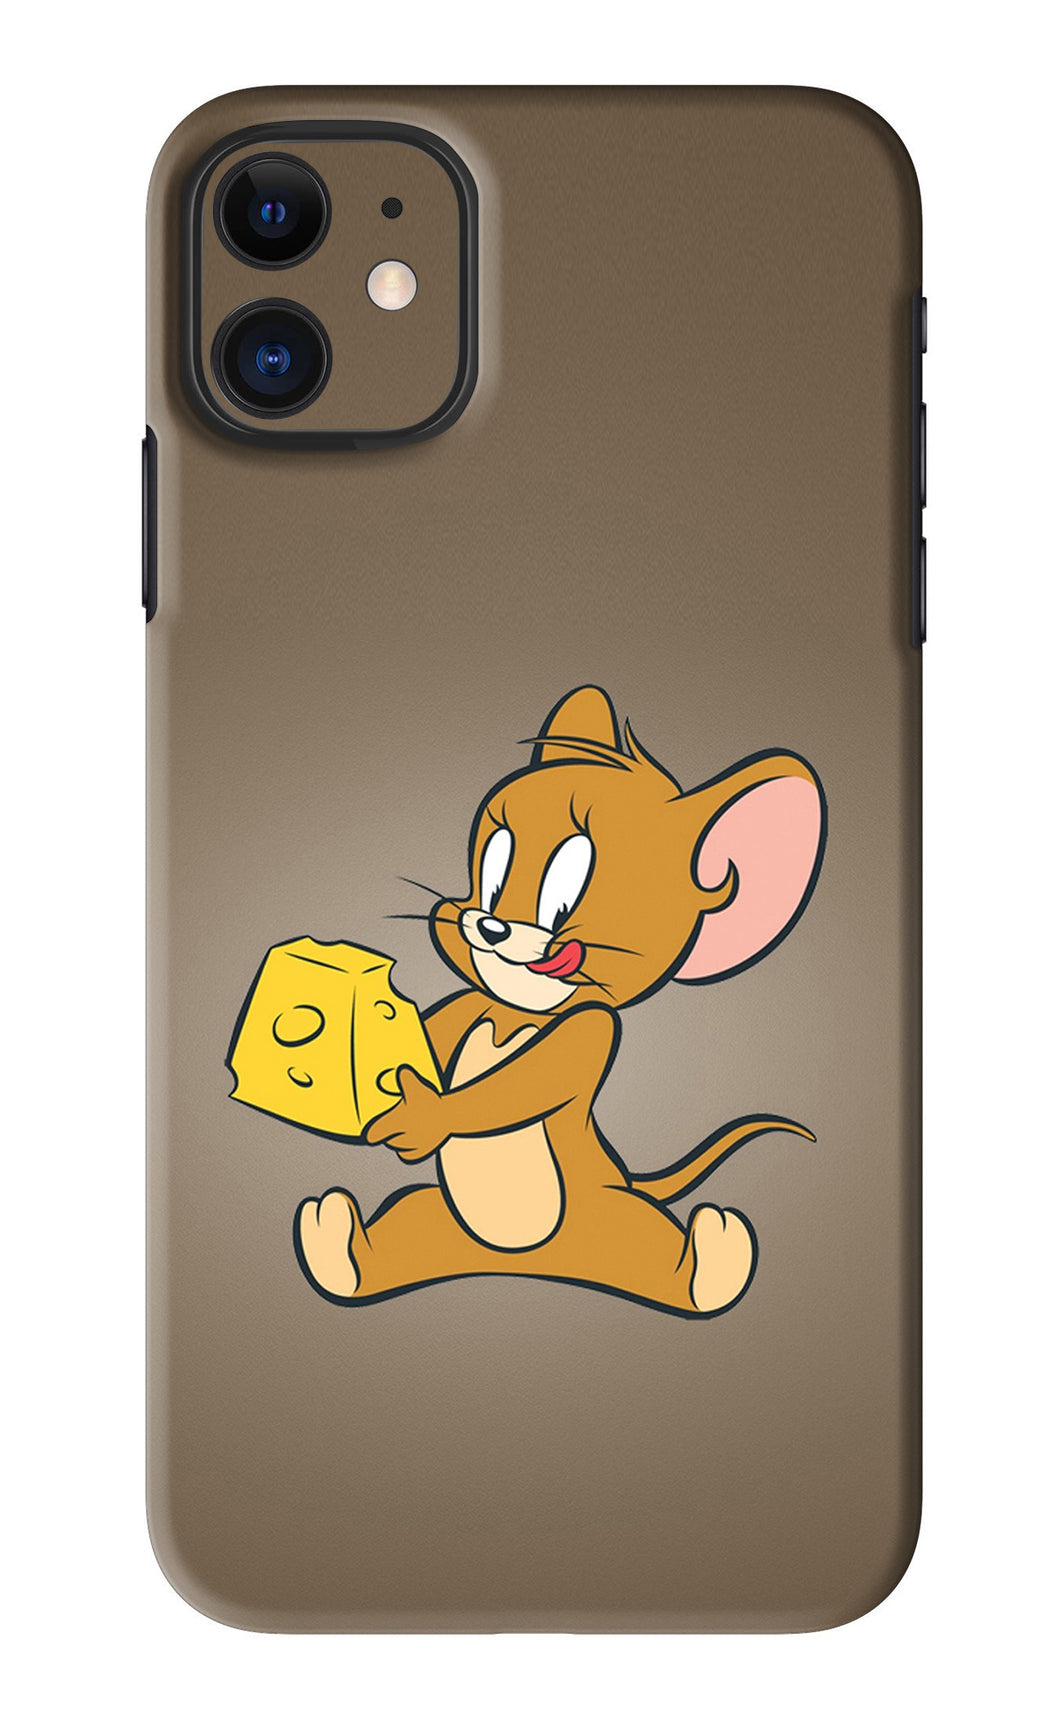 Jerry iPhone 11 Back Skin Wrap